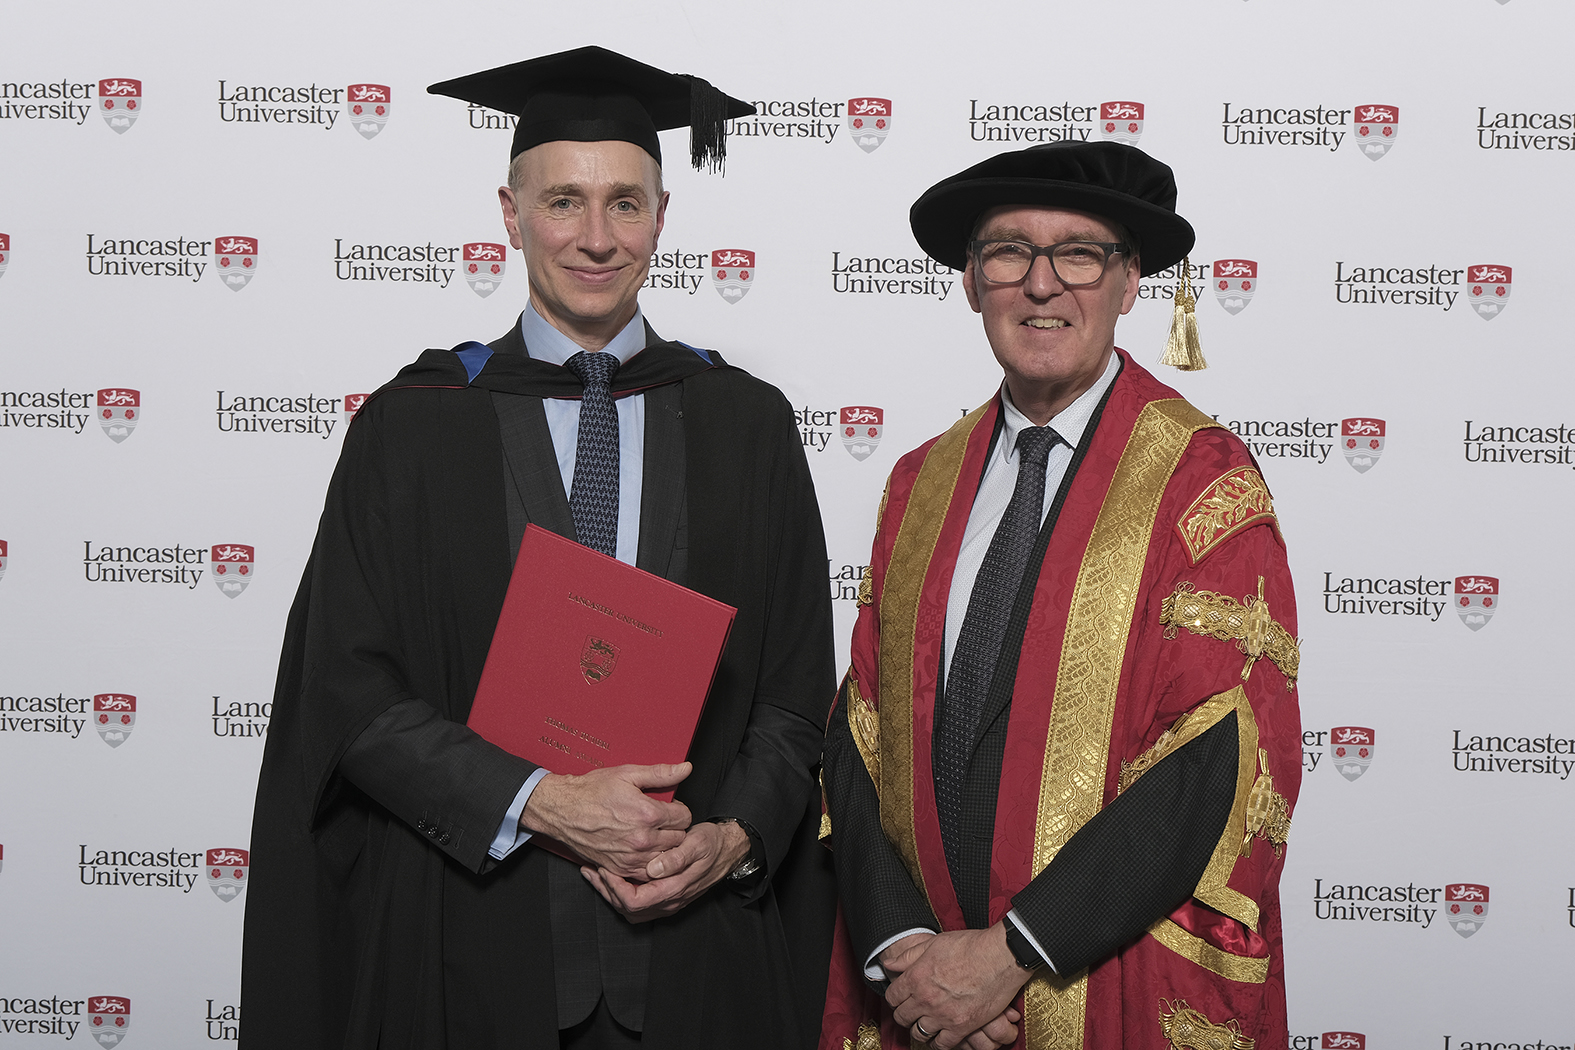 Thomas Buberl (left), in graduation gown and hat, stands with University Chancellor, the Rt Hon Alan Milburn in front of a background decorated with the Lancaster University logo.